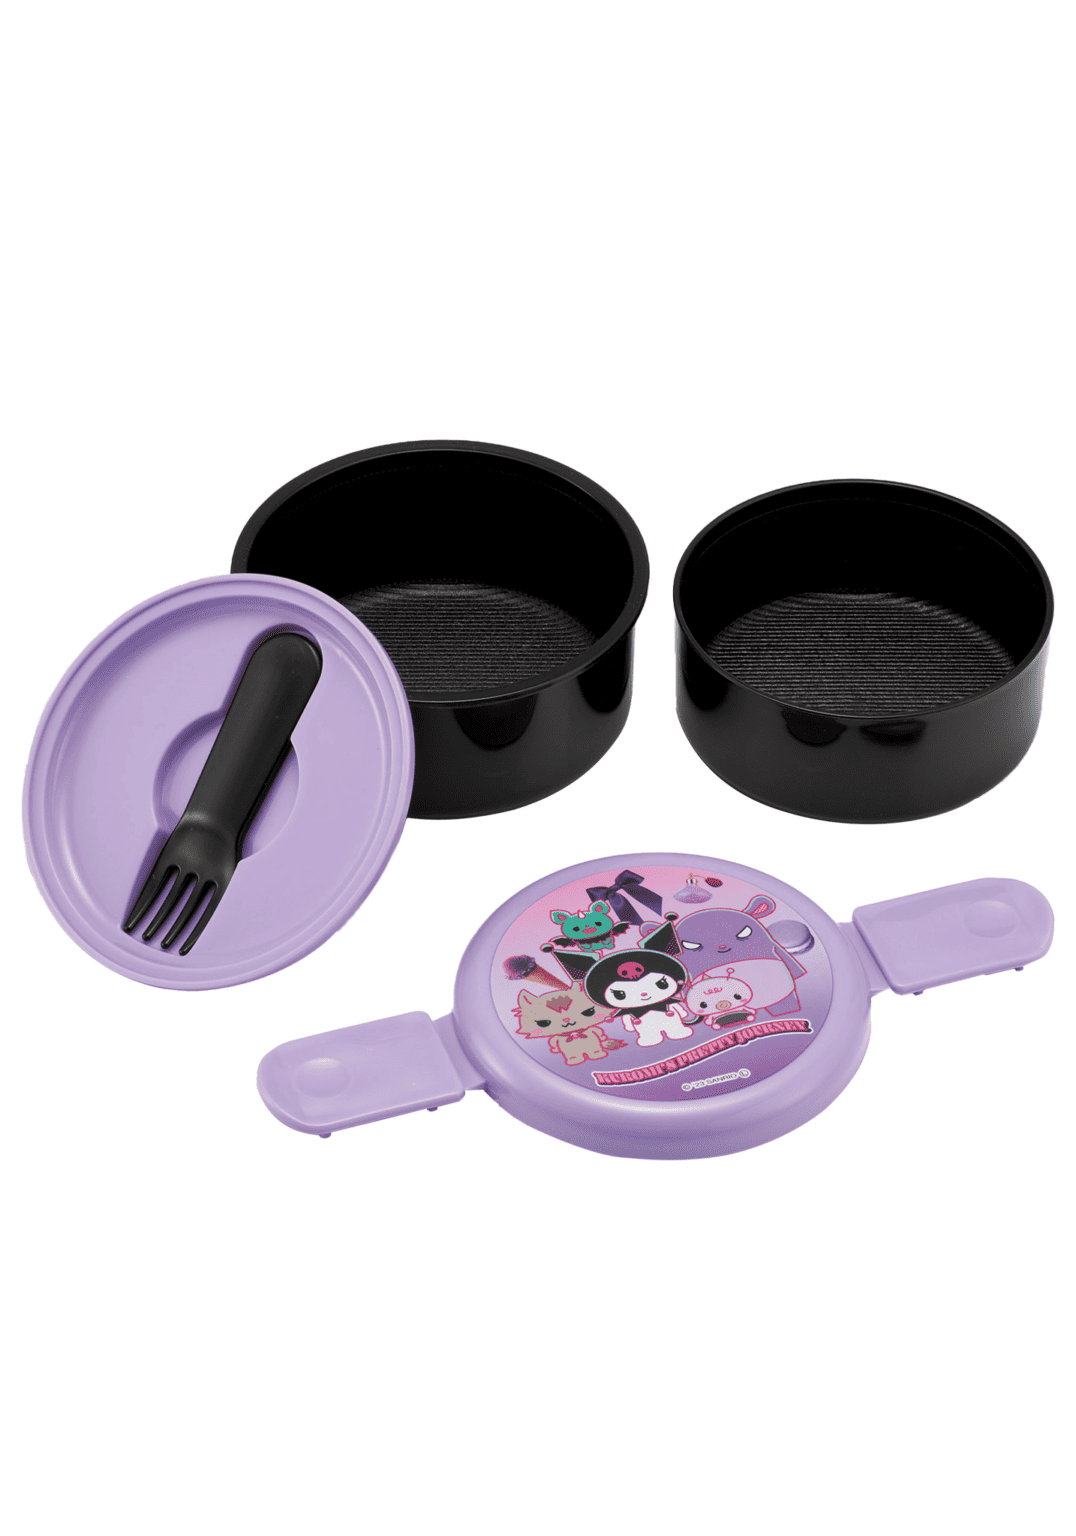 https://cdn.shopify.com/s/files/1/0528/2060/7157/files/clever-idiots-bento-kuromi-2-layered-round-bento-lunch-box-with-fork-40756657357014.png?v=1698009448&width=1076